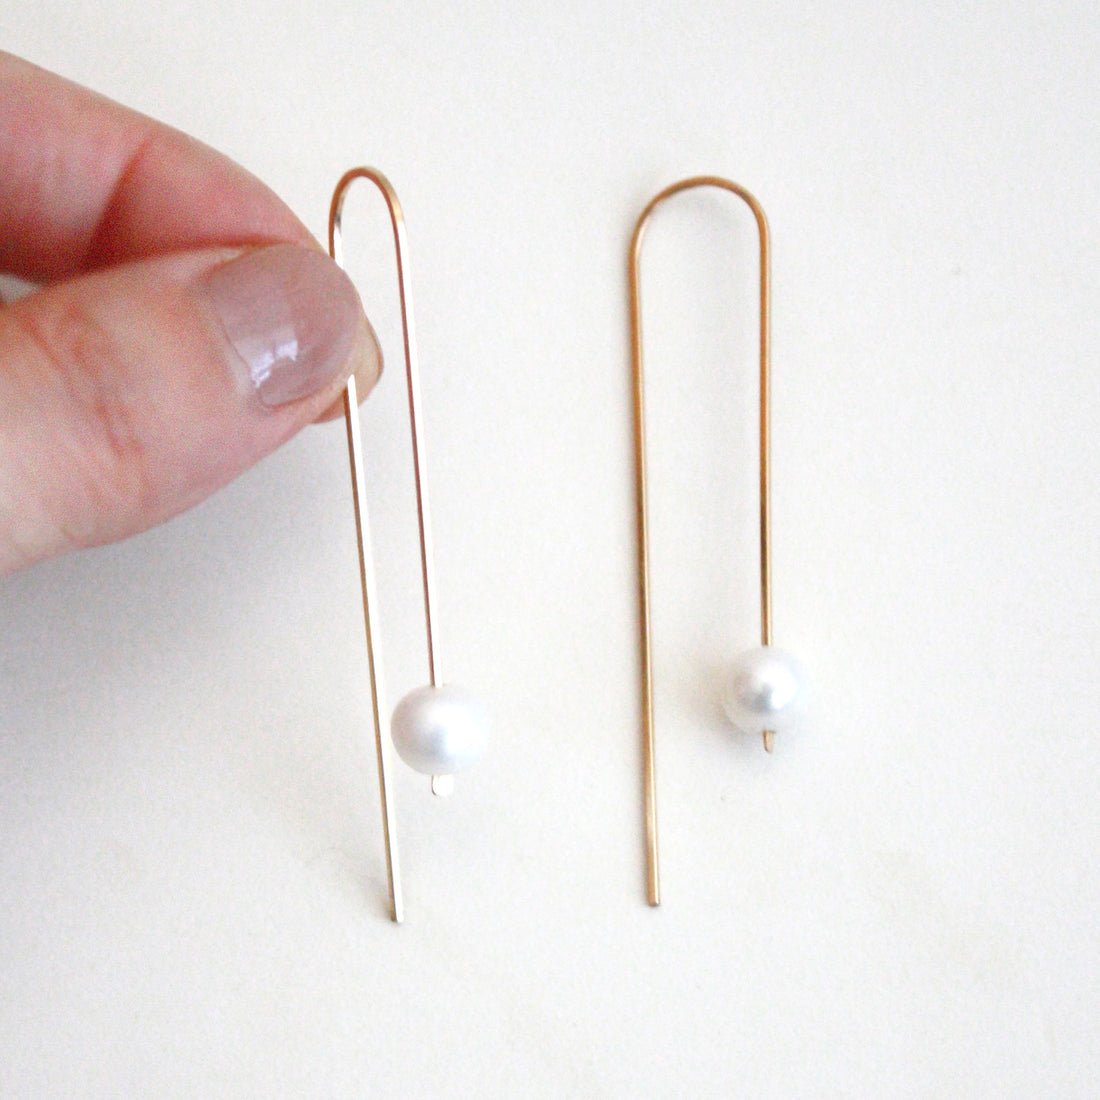 A long gold tone u-shaped earring with a single large pearl. The Long Arc Threader Earrings with Large Pearl is designed by Hooks and Luxe and handcrafted in Jackson Heights, NY.